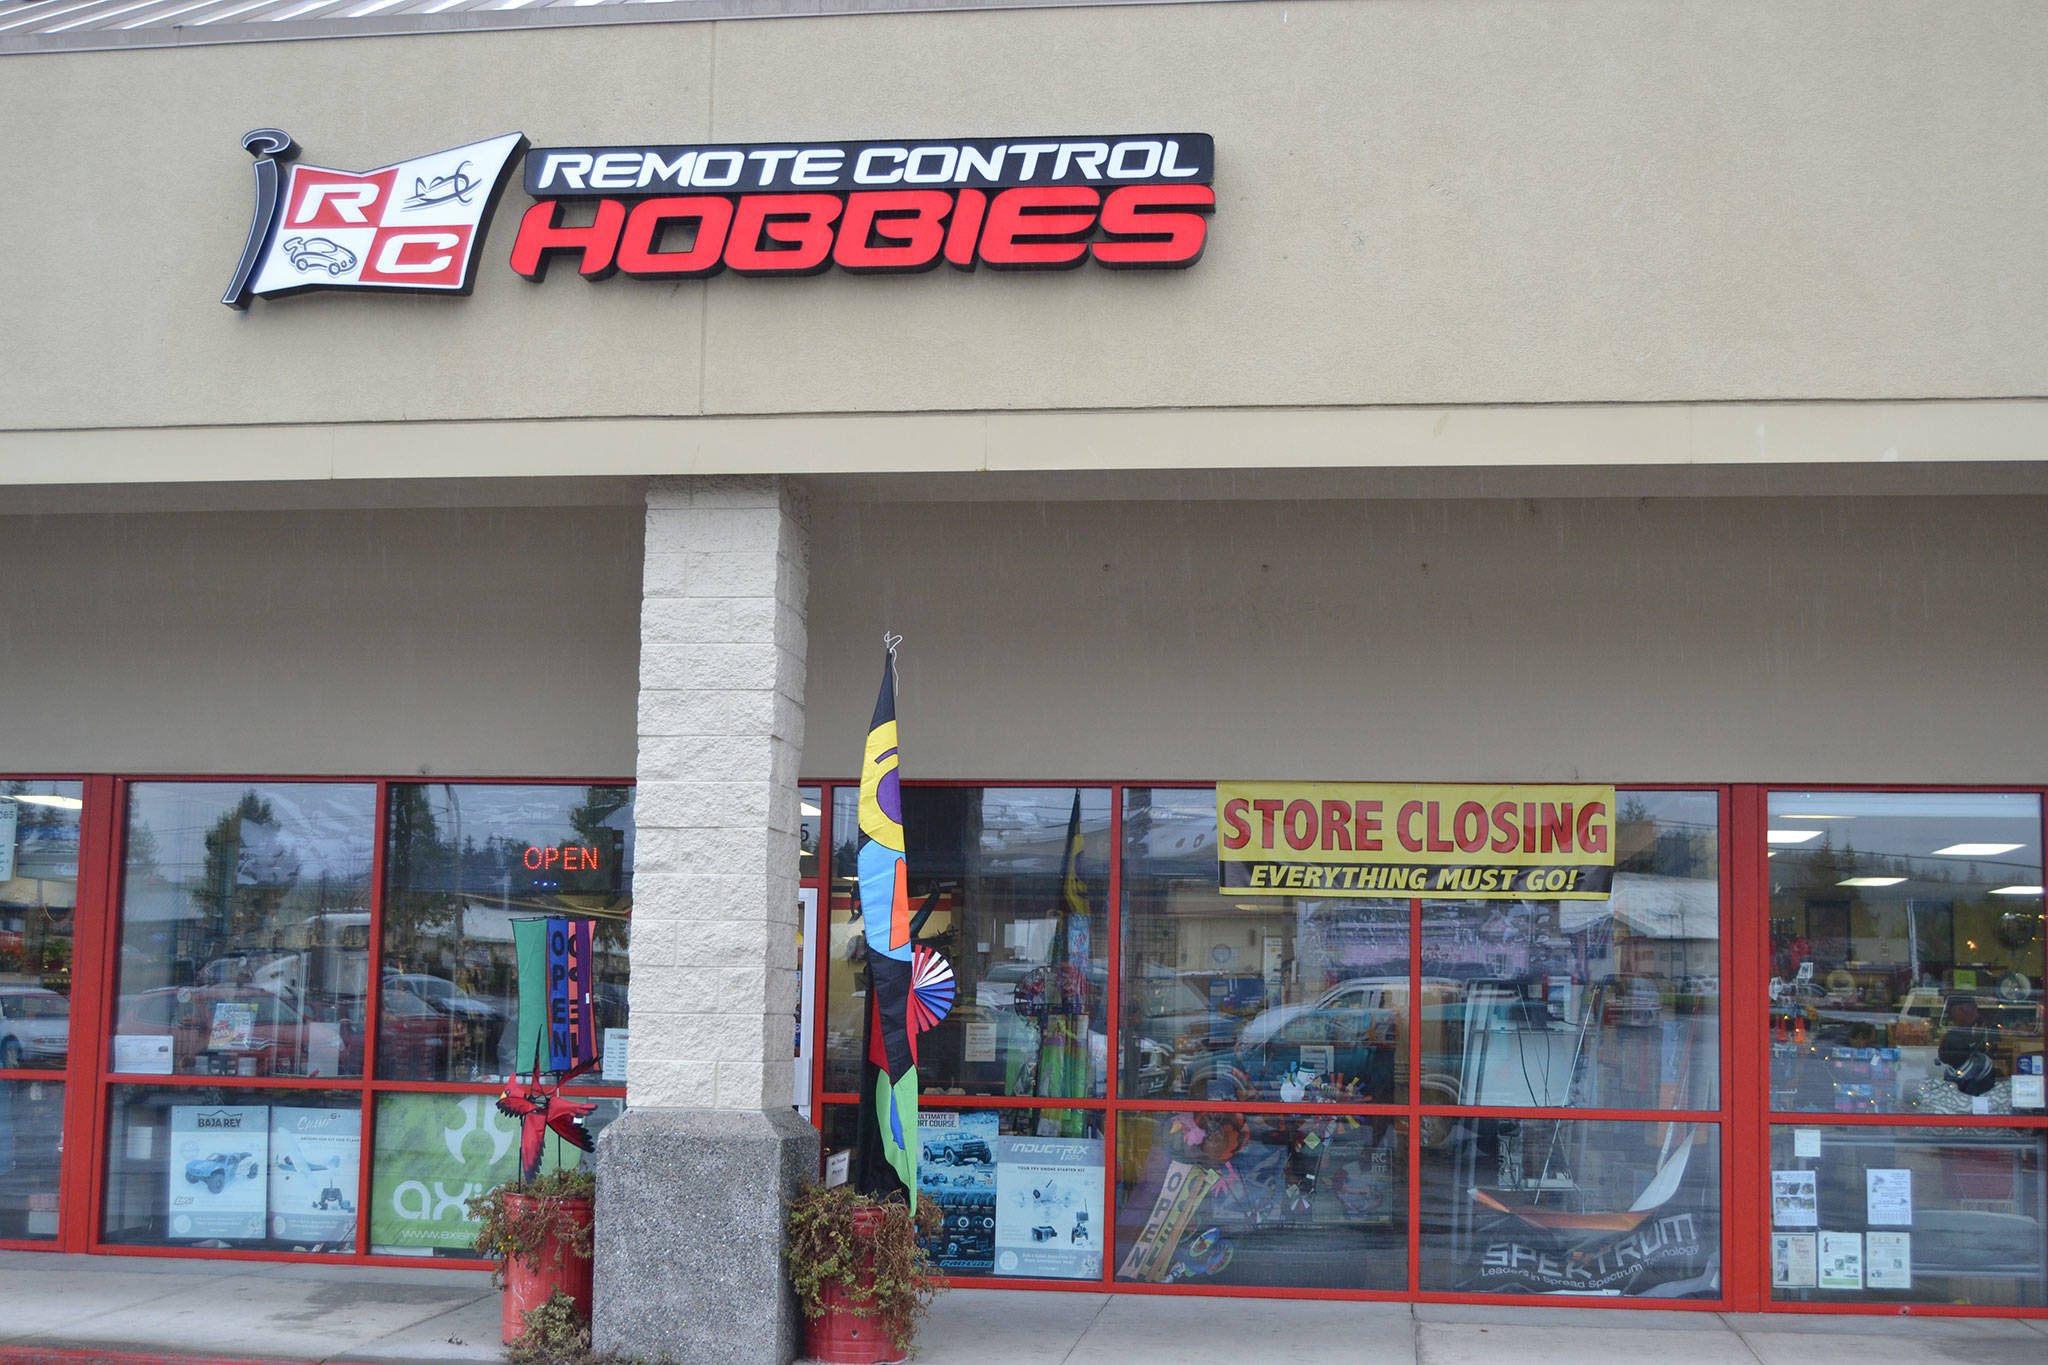 Remote Control Hobbies Sequim closes later this month after inventory and furnishings are sold. Store owner Tim Verdick said a decline in sales the past year led to the decision to close. Sequim Gazette photos by Matthew Nash